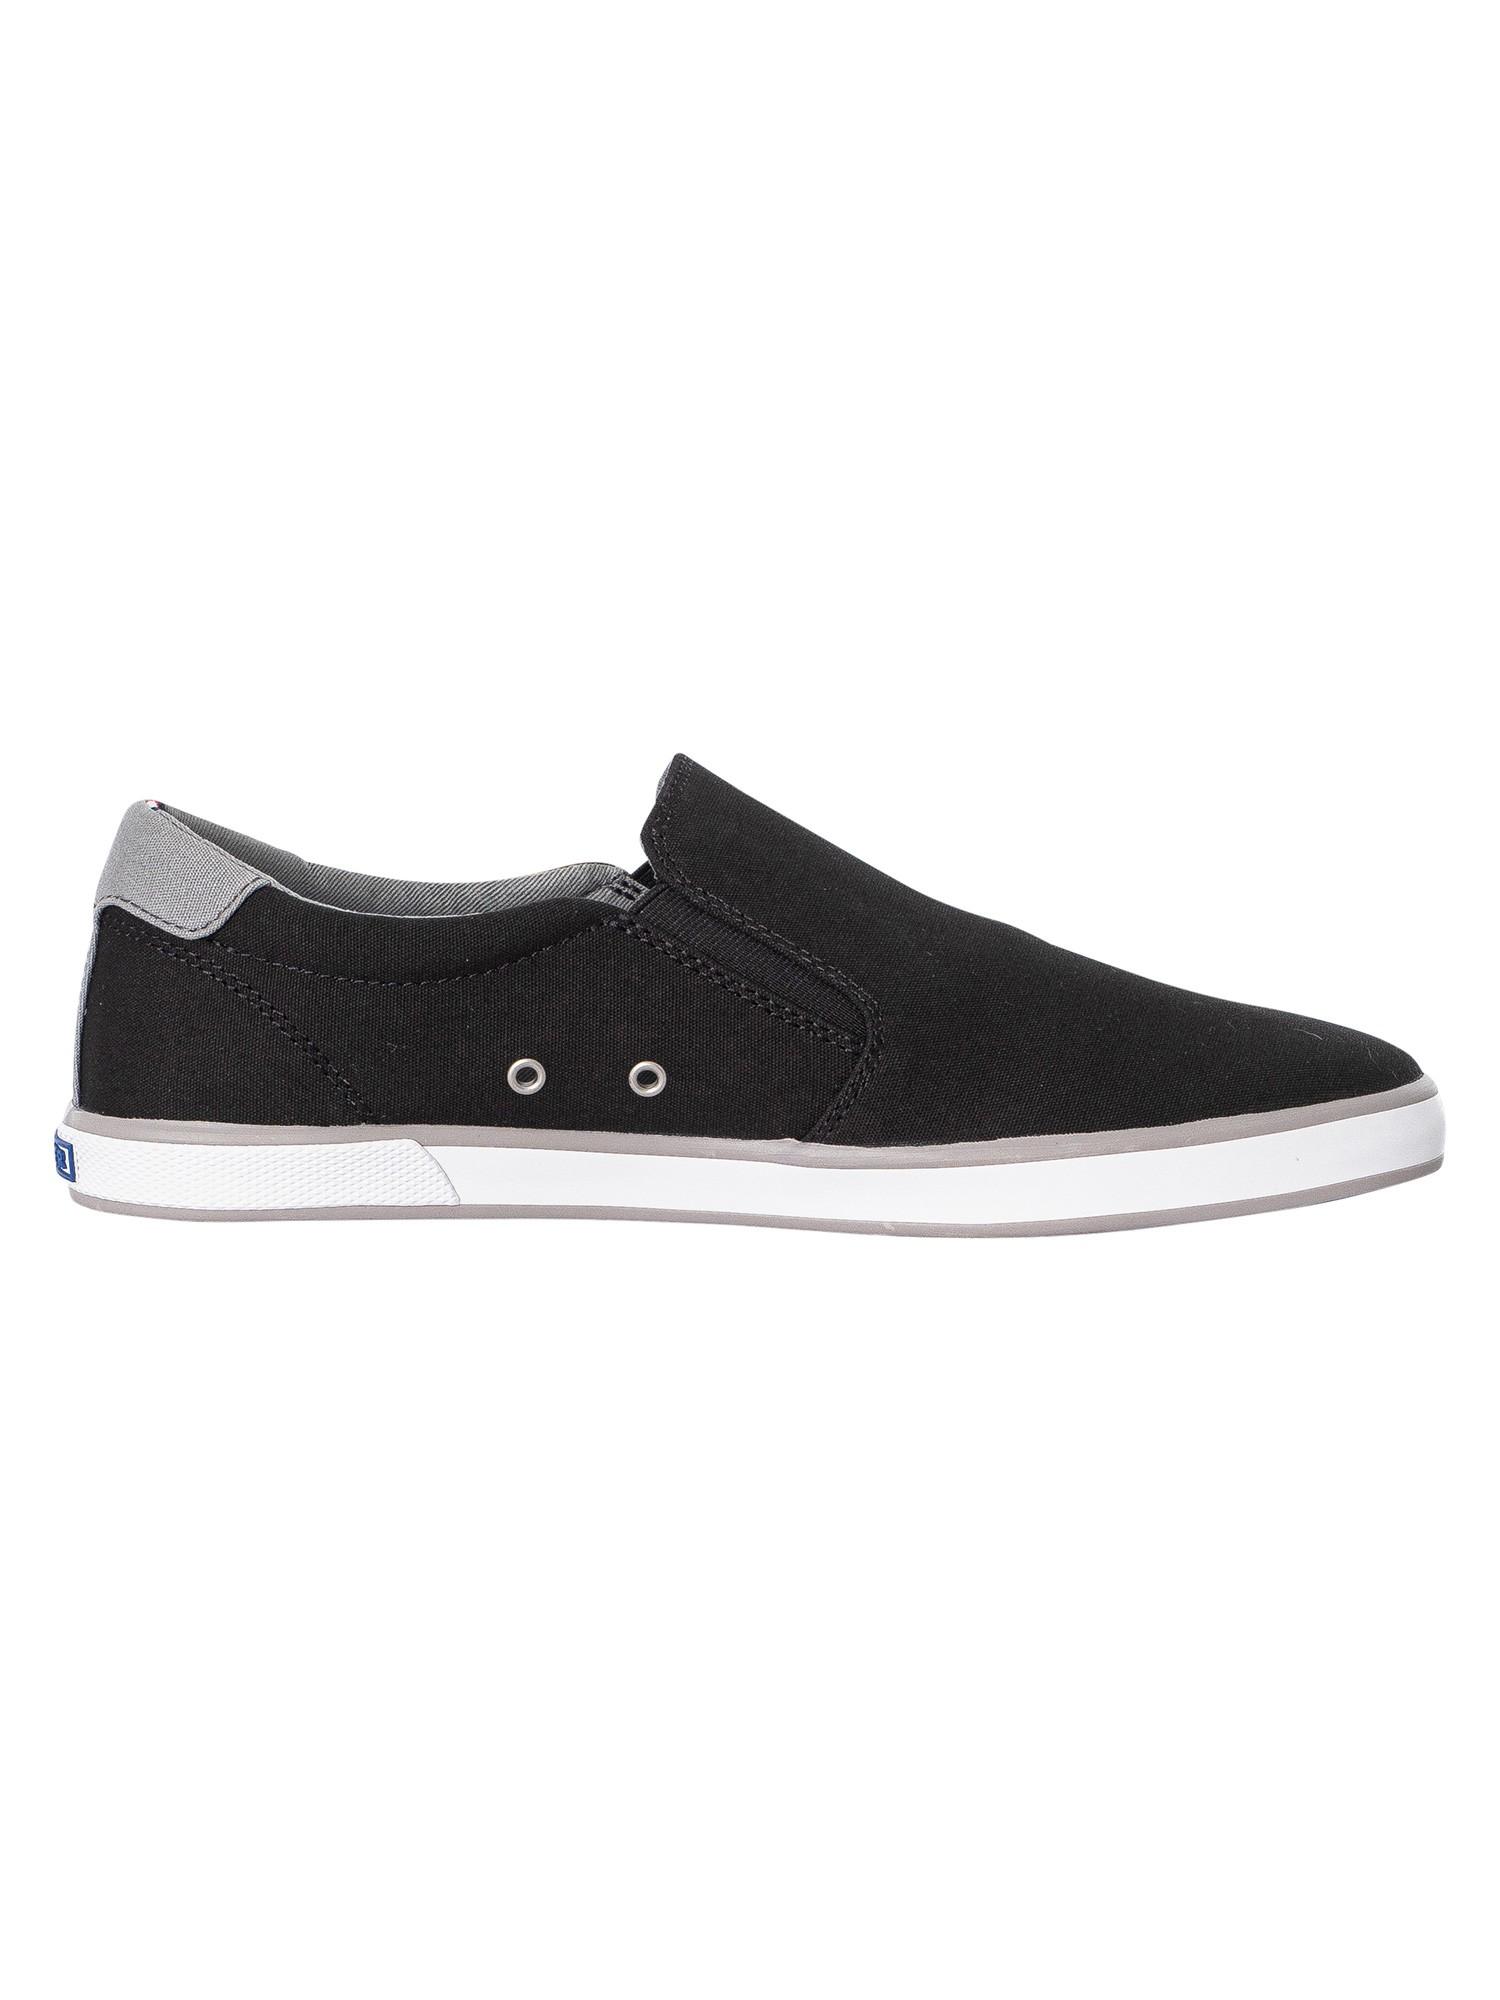 Tommy Hilfiger Iconic Slip On Trainers in Black for Men | Lyst